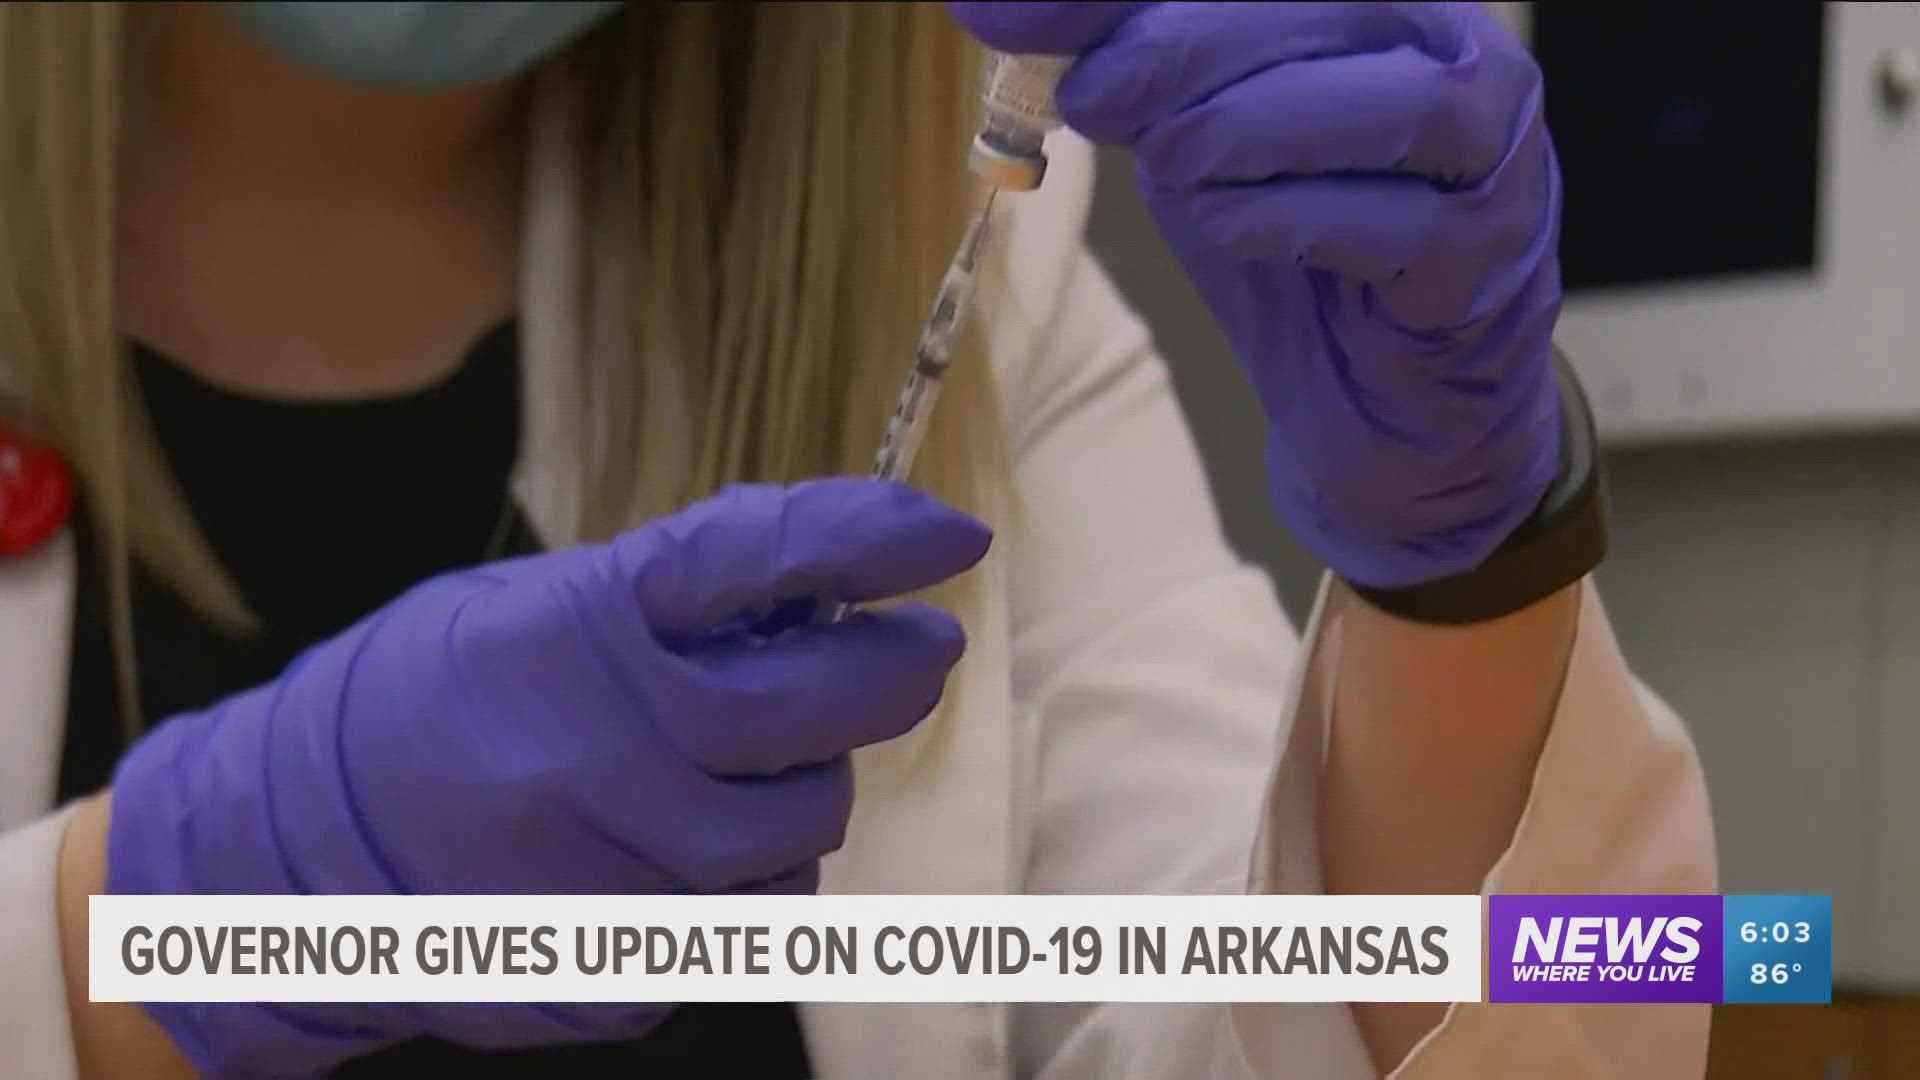 While a mask policy protects most students in Arkansas, there is still a concern for outbreaks.